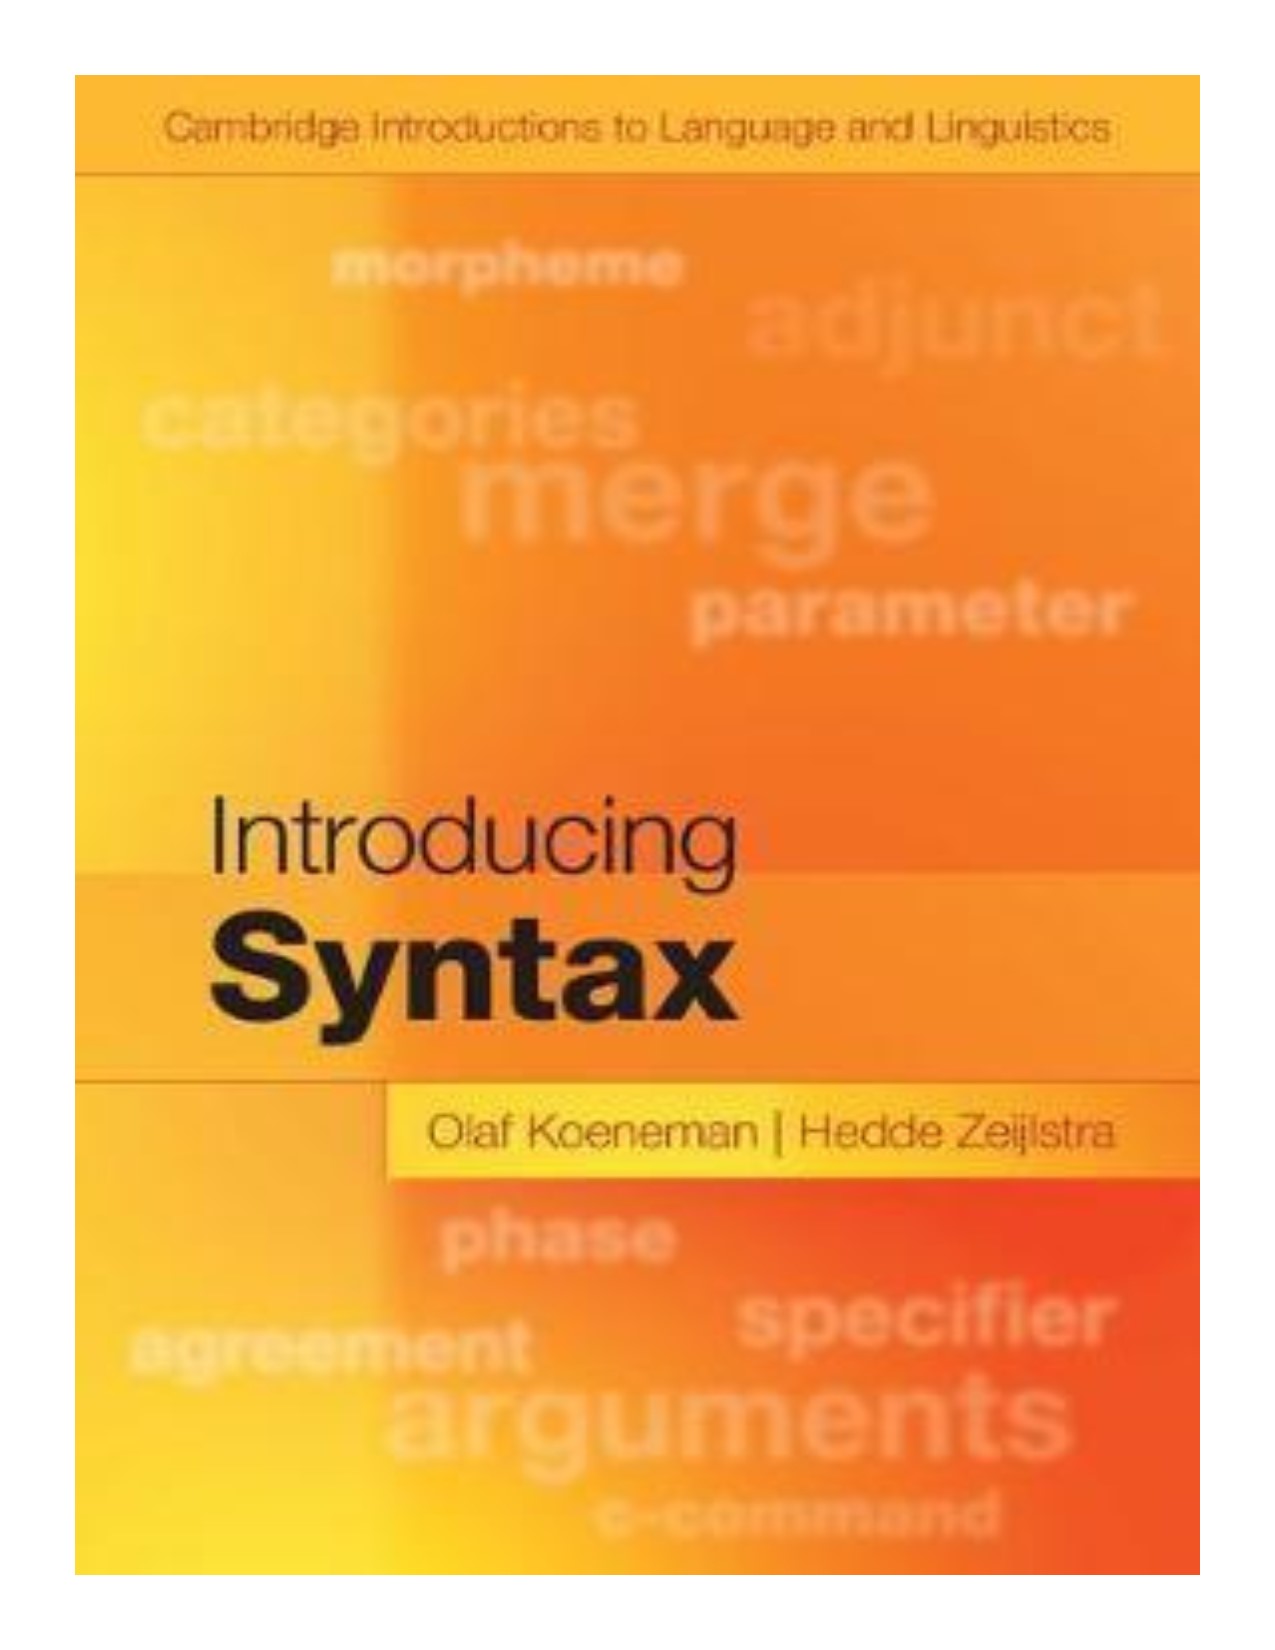 Introducing syntax